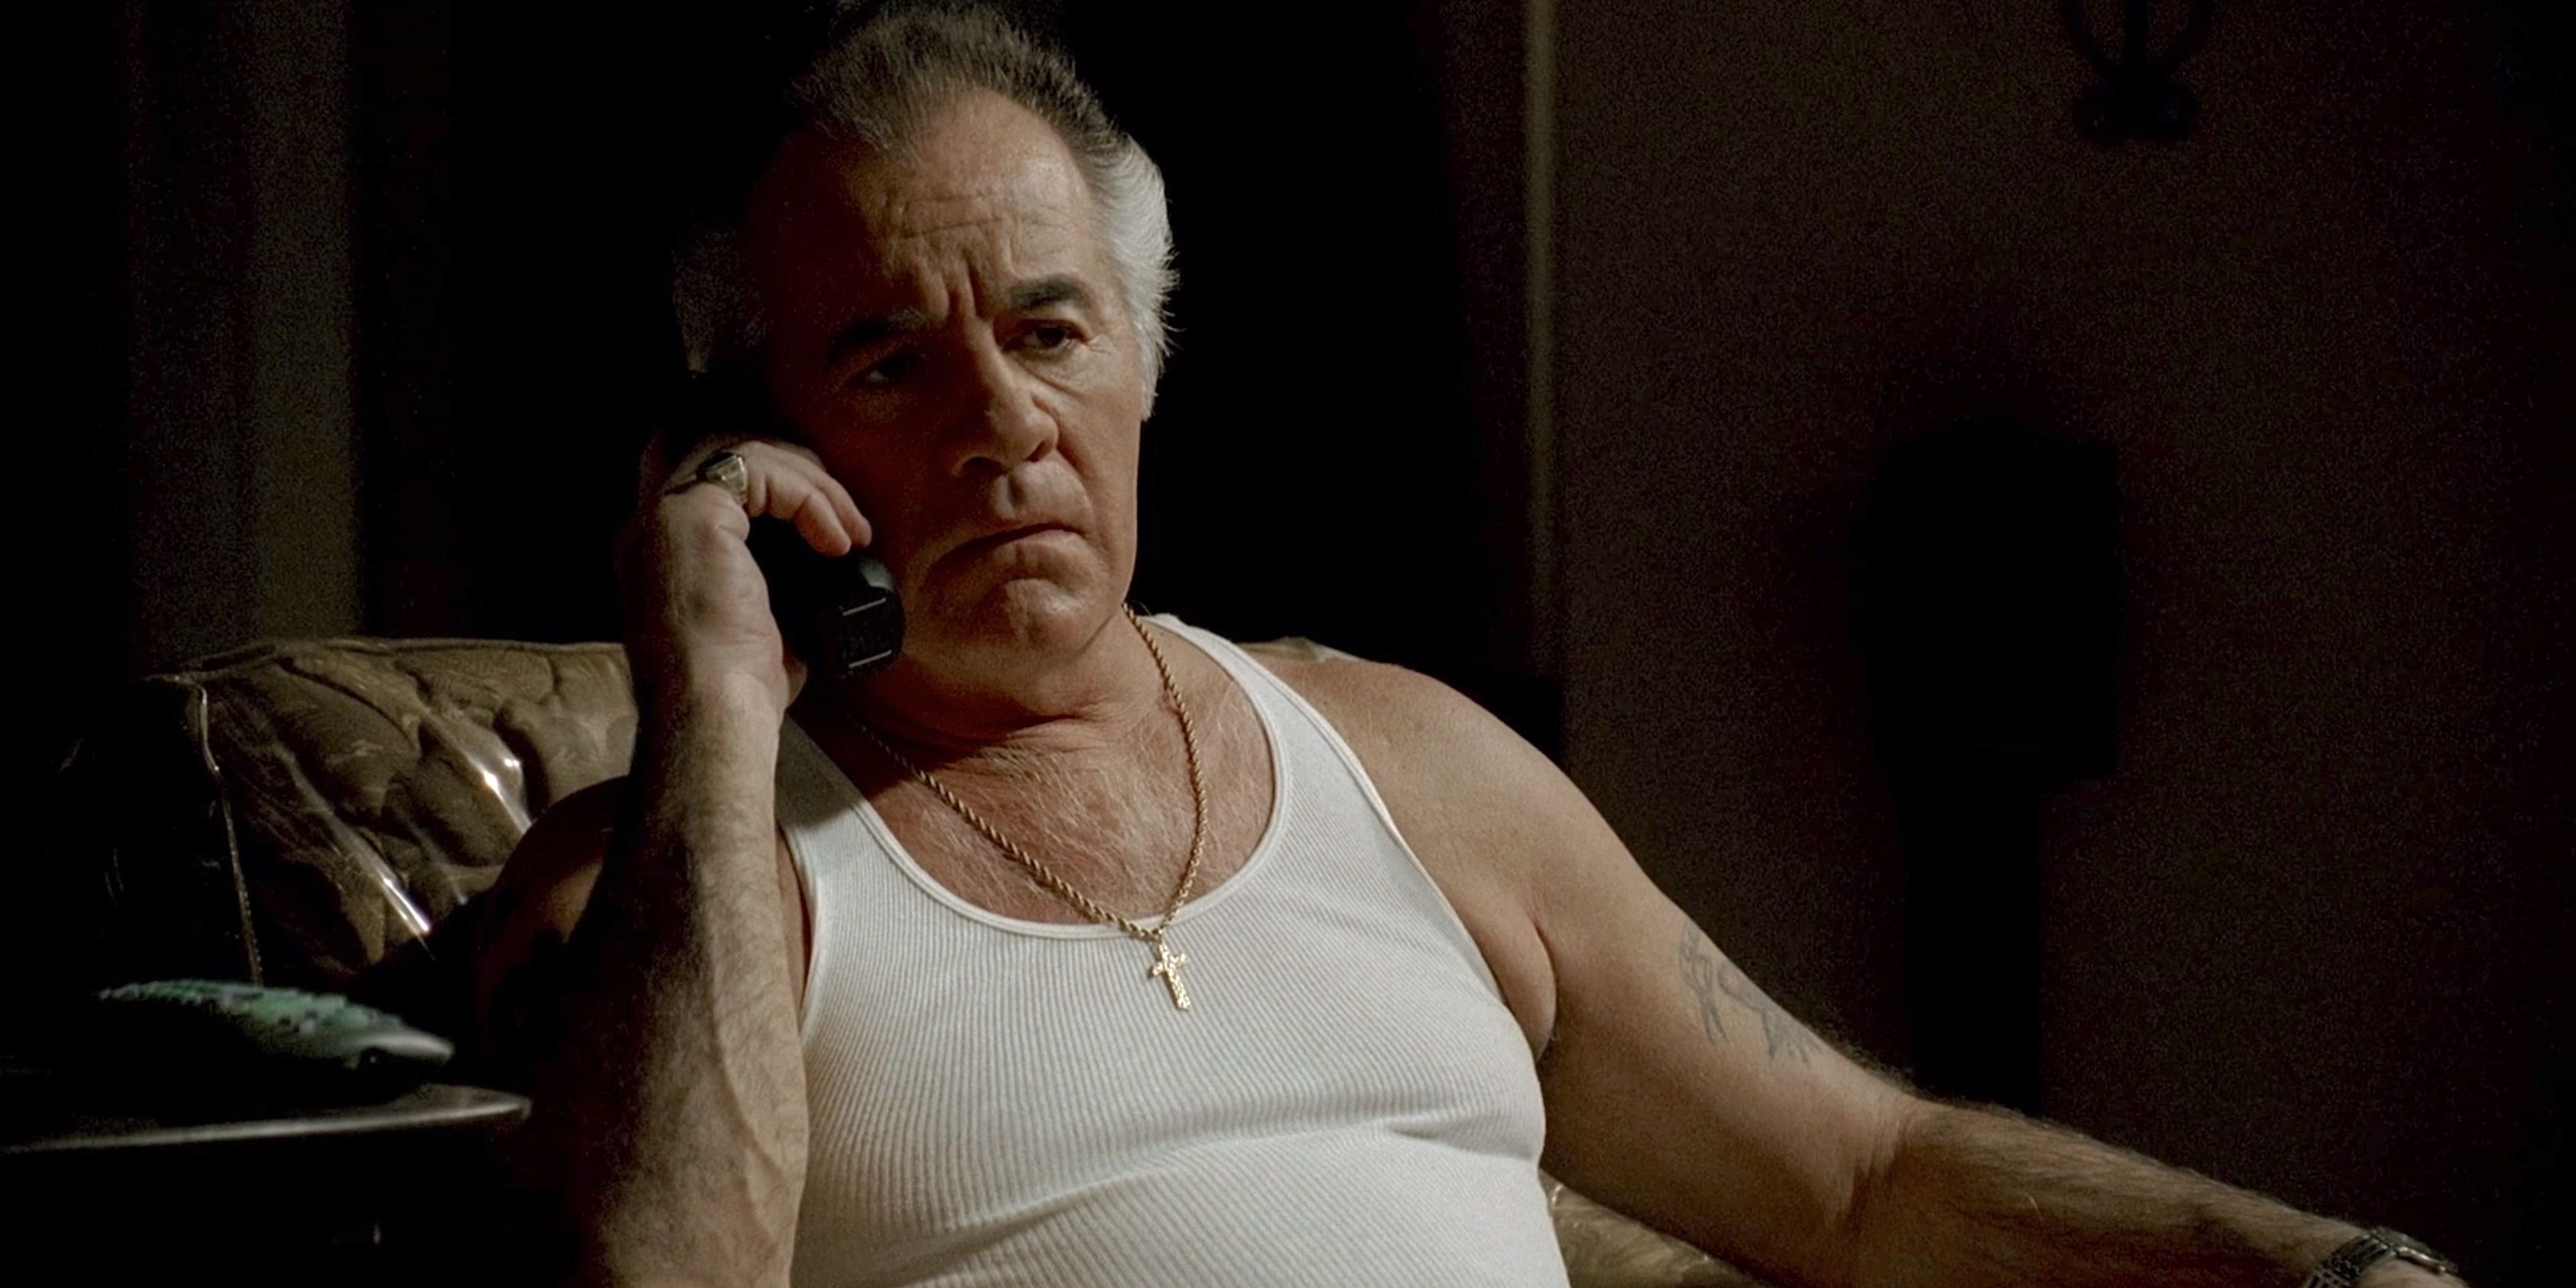 Paulie speaks to his mother on the phone as she is at the Green Grove Retirement Community in The Sopranos